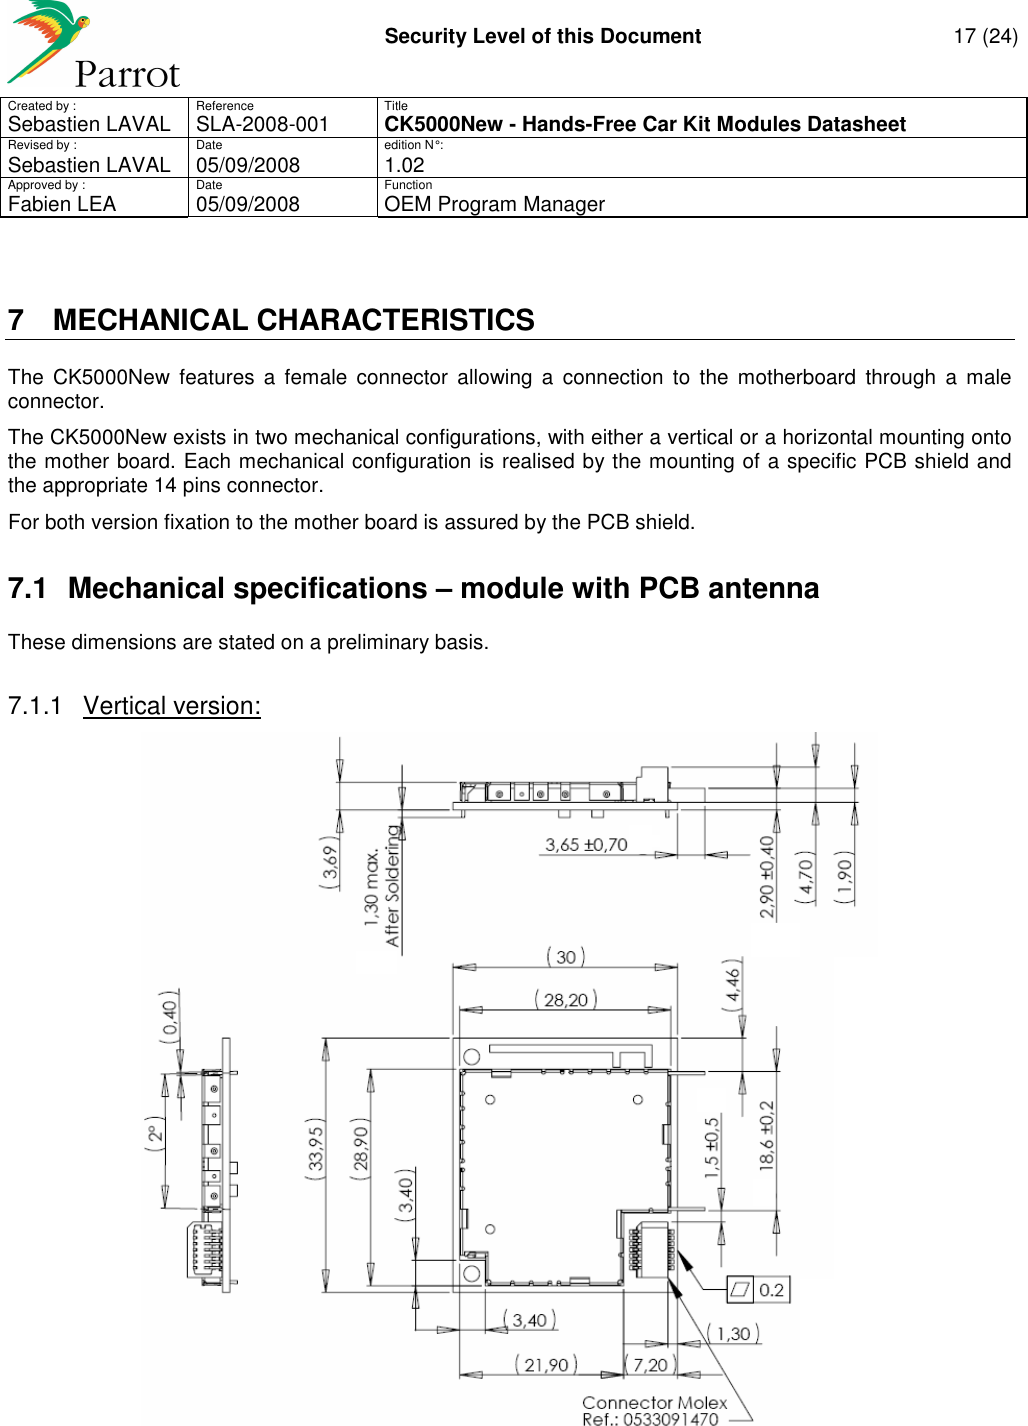     Security Level of this Document  17 (24) Created by :  Reference  Title Sebastien LAVAL   SLA-2008-001 CK5000New - Hands-Free Car Kit Modules Datasheet Revised by :  Date  edition N° : Sebastien LAVAL  05/09/2008  1.02 Approved by :  Date  Function     Fabien LEA  05/09/2008  OEM Program Manager   7  MECHANICAL CHARACTERISTICS The  CK5000New  features  a  female  connector  allowing  a  connection  to  the  motherboard  through  a  male connector. The CK5000New exists in two mechanical configurations, with either a vertical or a horizontal mounting onto the mother board. Each mechanical configuration is realised by the mounting of a specific PCB shield and the appropriate 14 pins connector. For both version fixation to the mother board is assured by the PCB shield.  7.1  Mechanical specifications – module with PCB antenna These dimensions are stated on a preliminary basis.  7.1.1  Vertical version:   